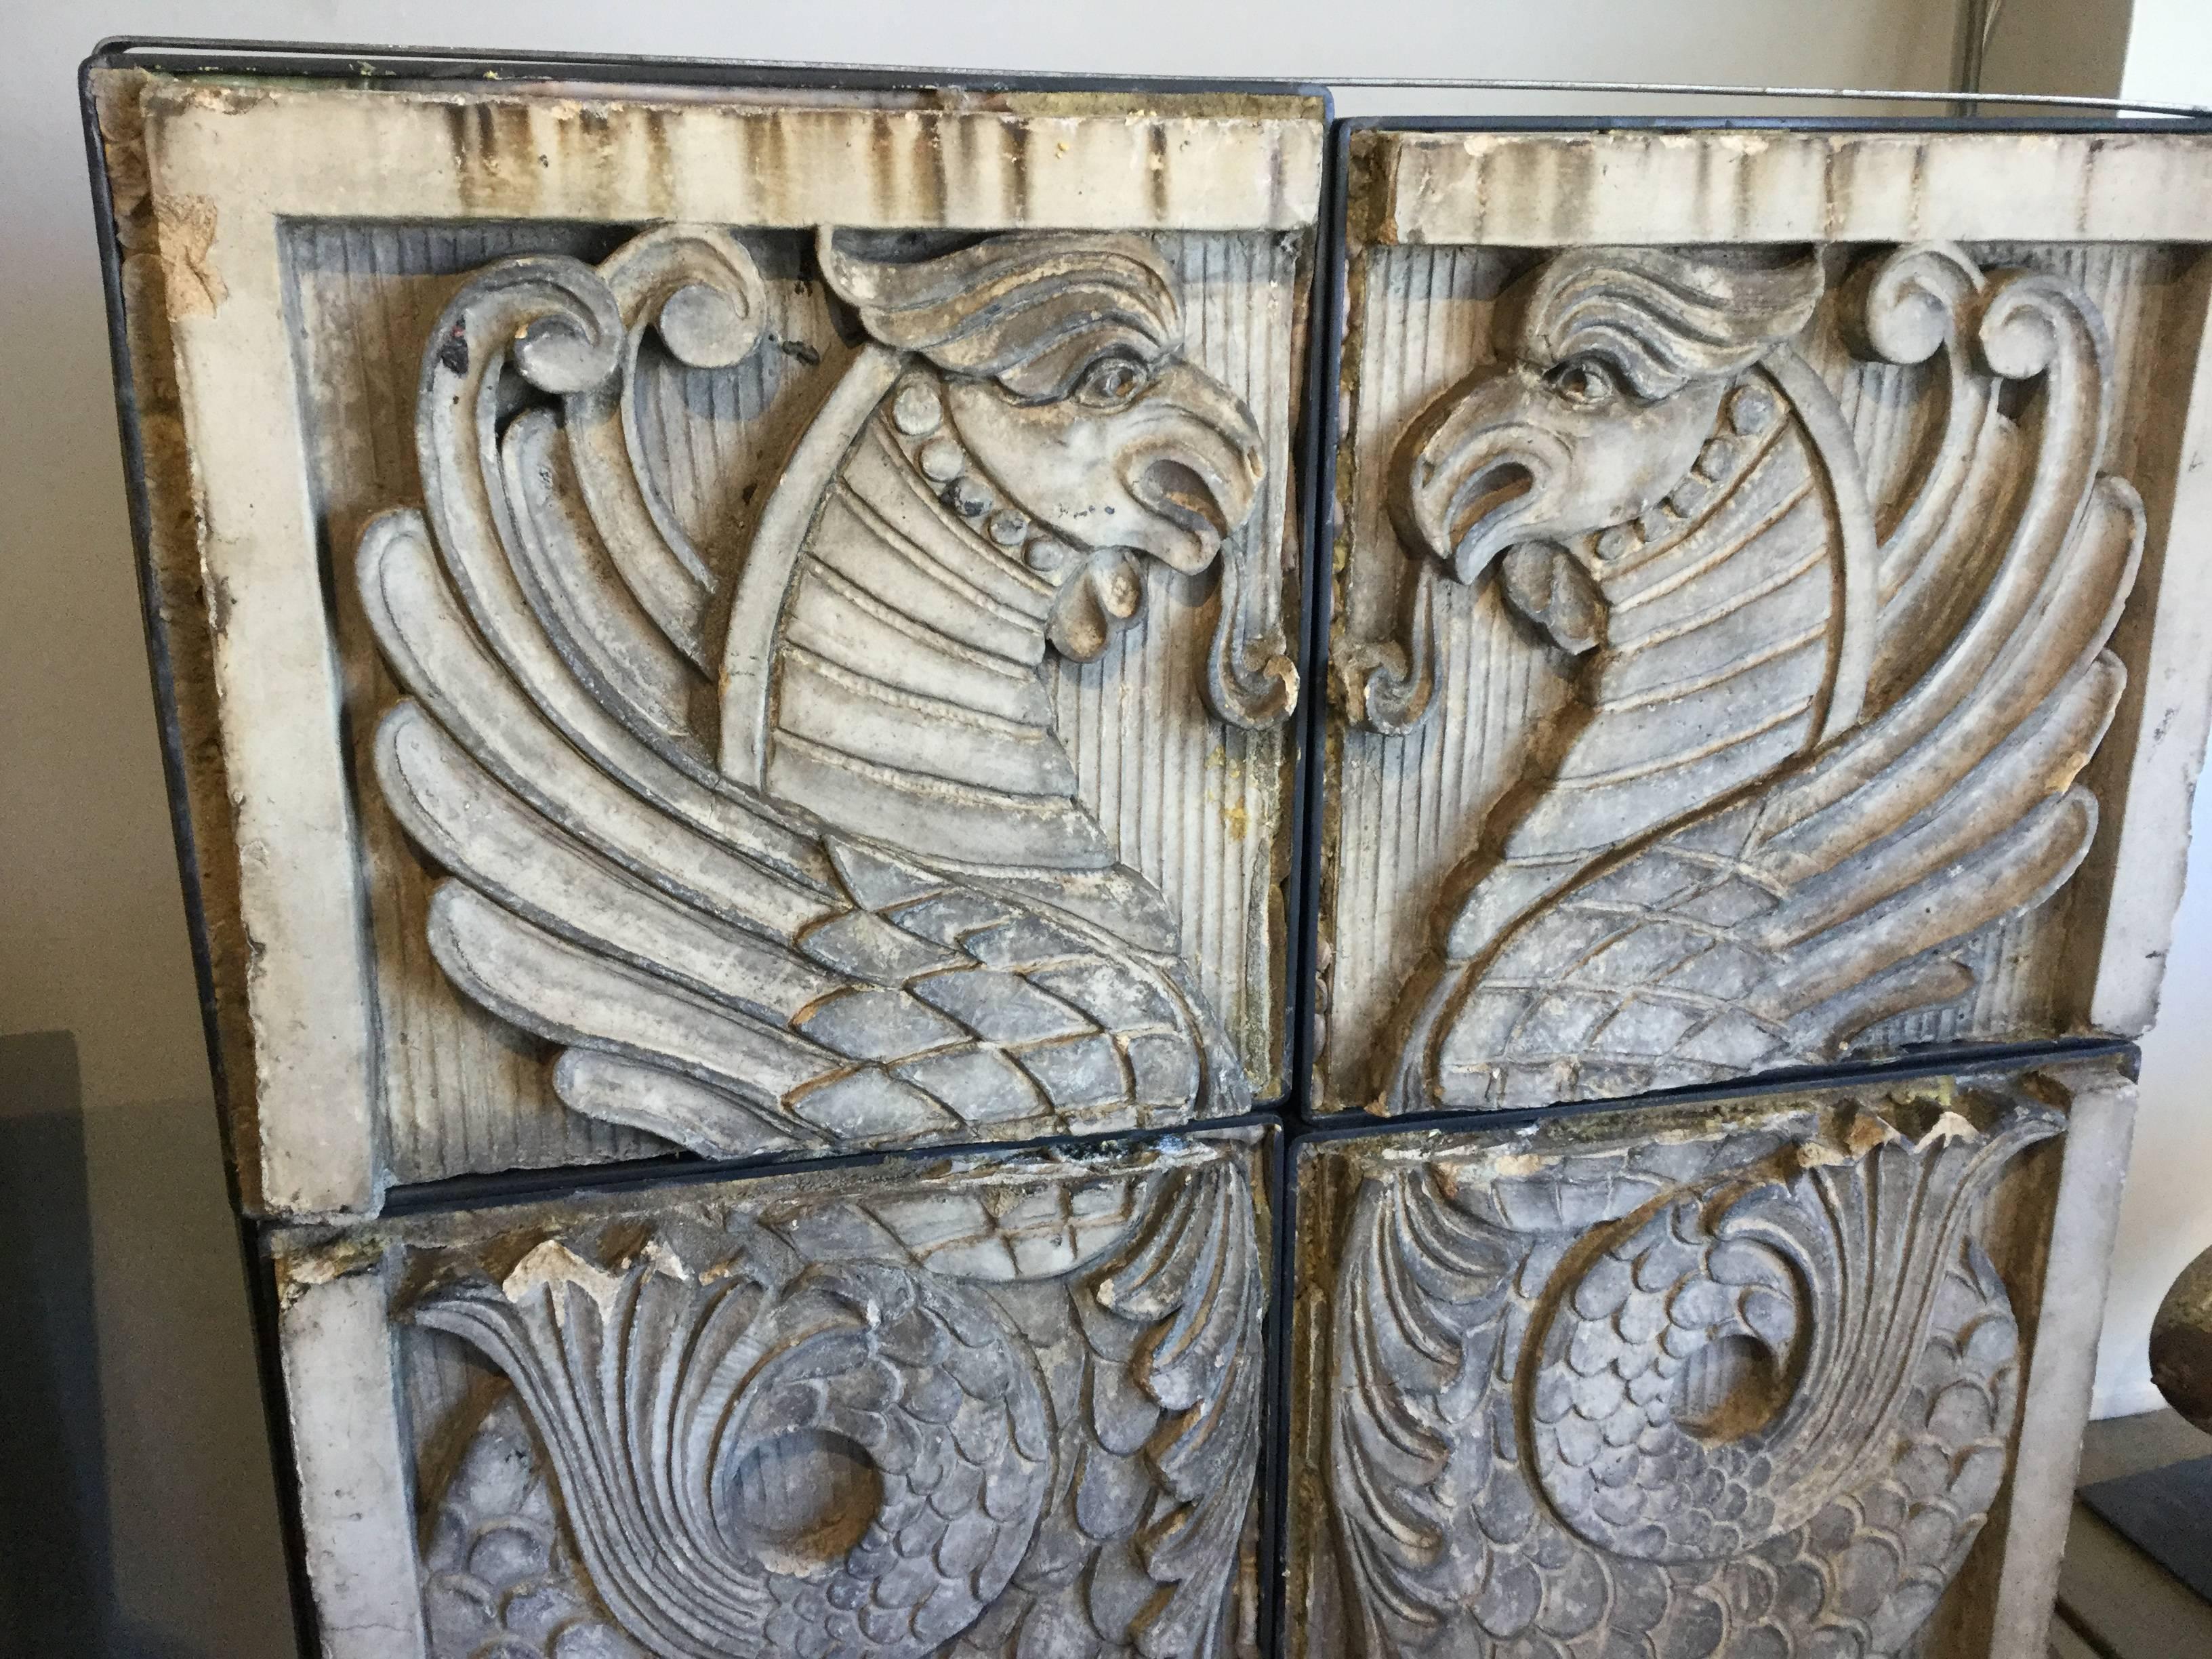 Architectural terrcotta Frieze of two sea Griffins. I love this piece but can't keep it. It was made by the Atlantic Tile Co, NY, circa 1900. The architectural terra cotta friezes like this will probably never be made again for buildings of the